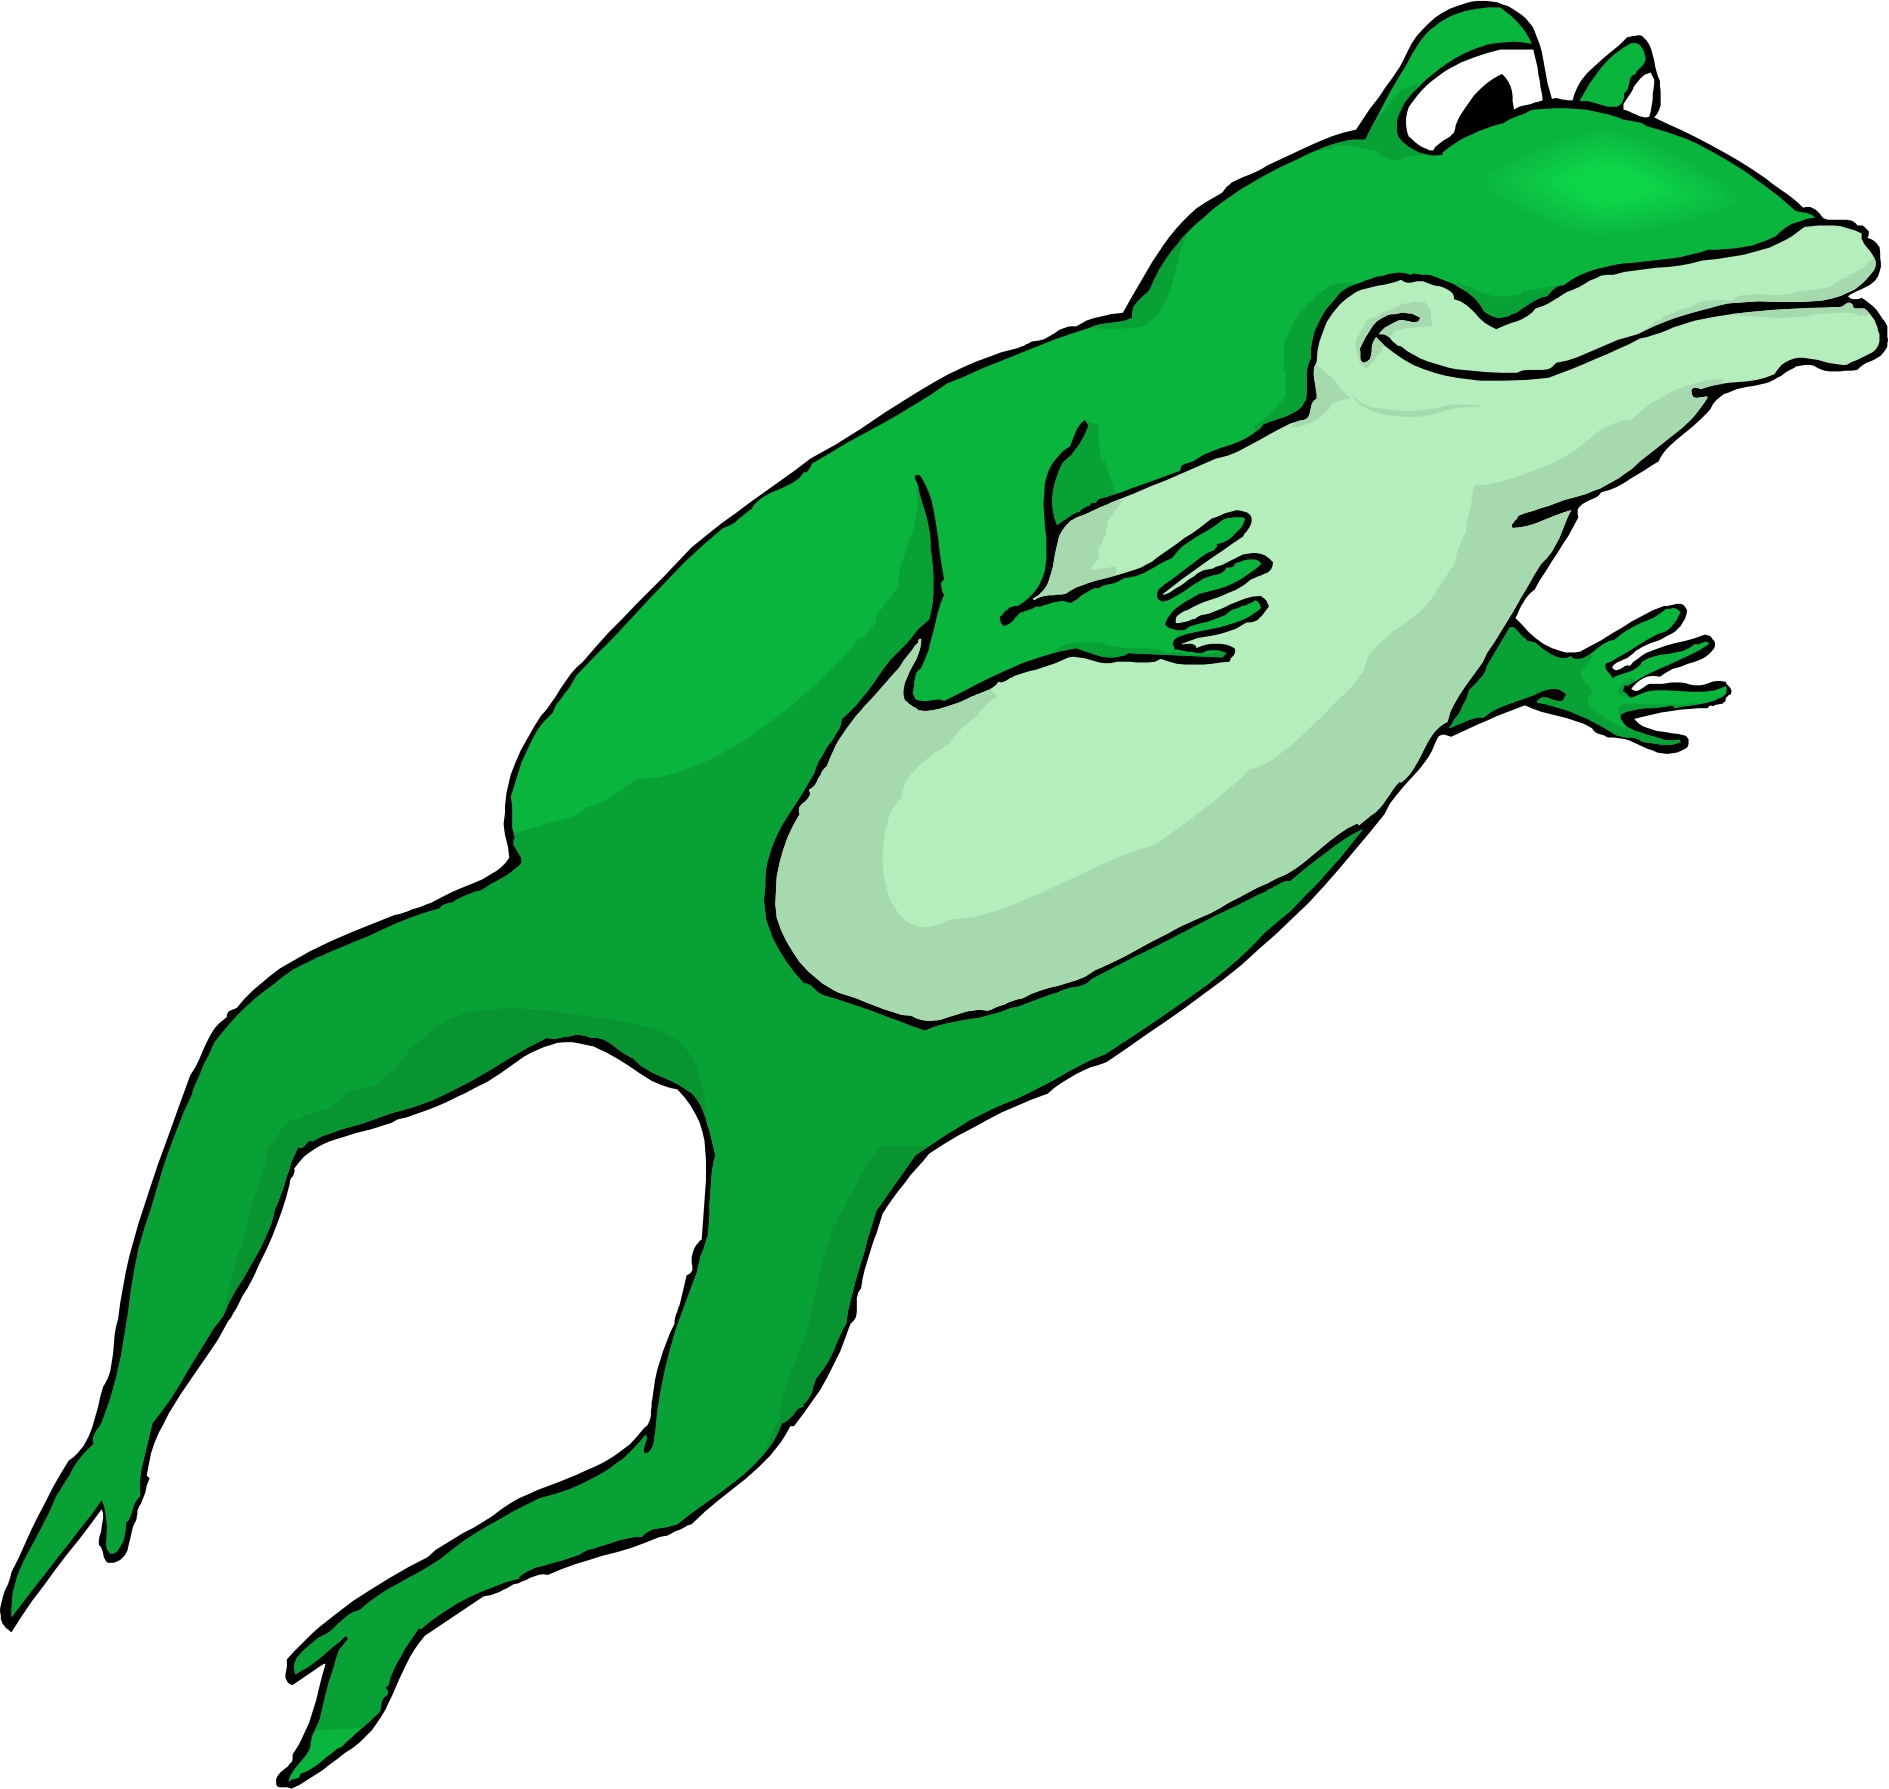 Free Animated Frogs Images, Download Free Animated Frogs Images png